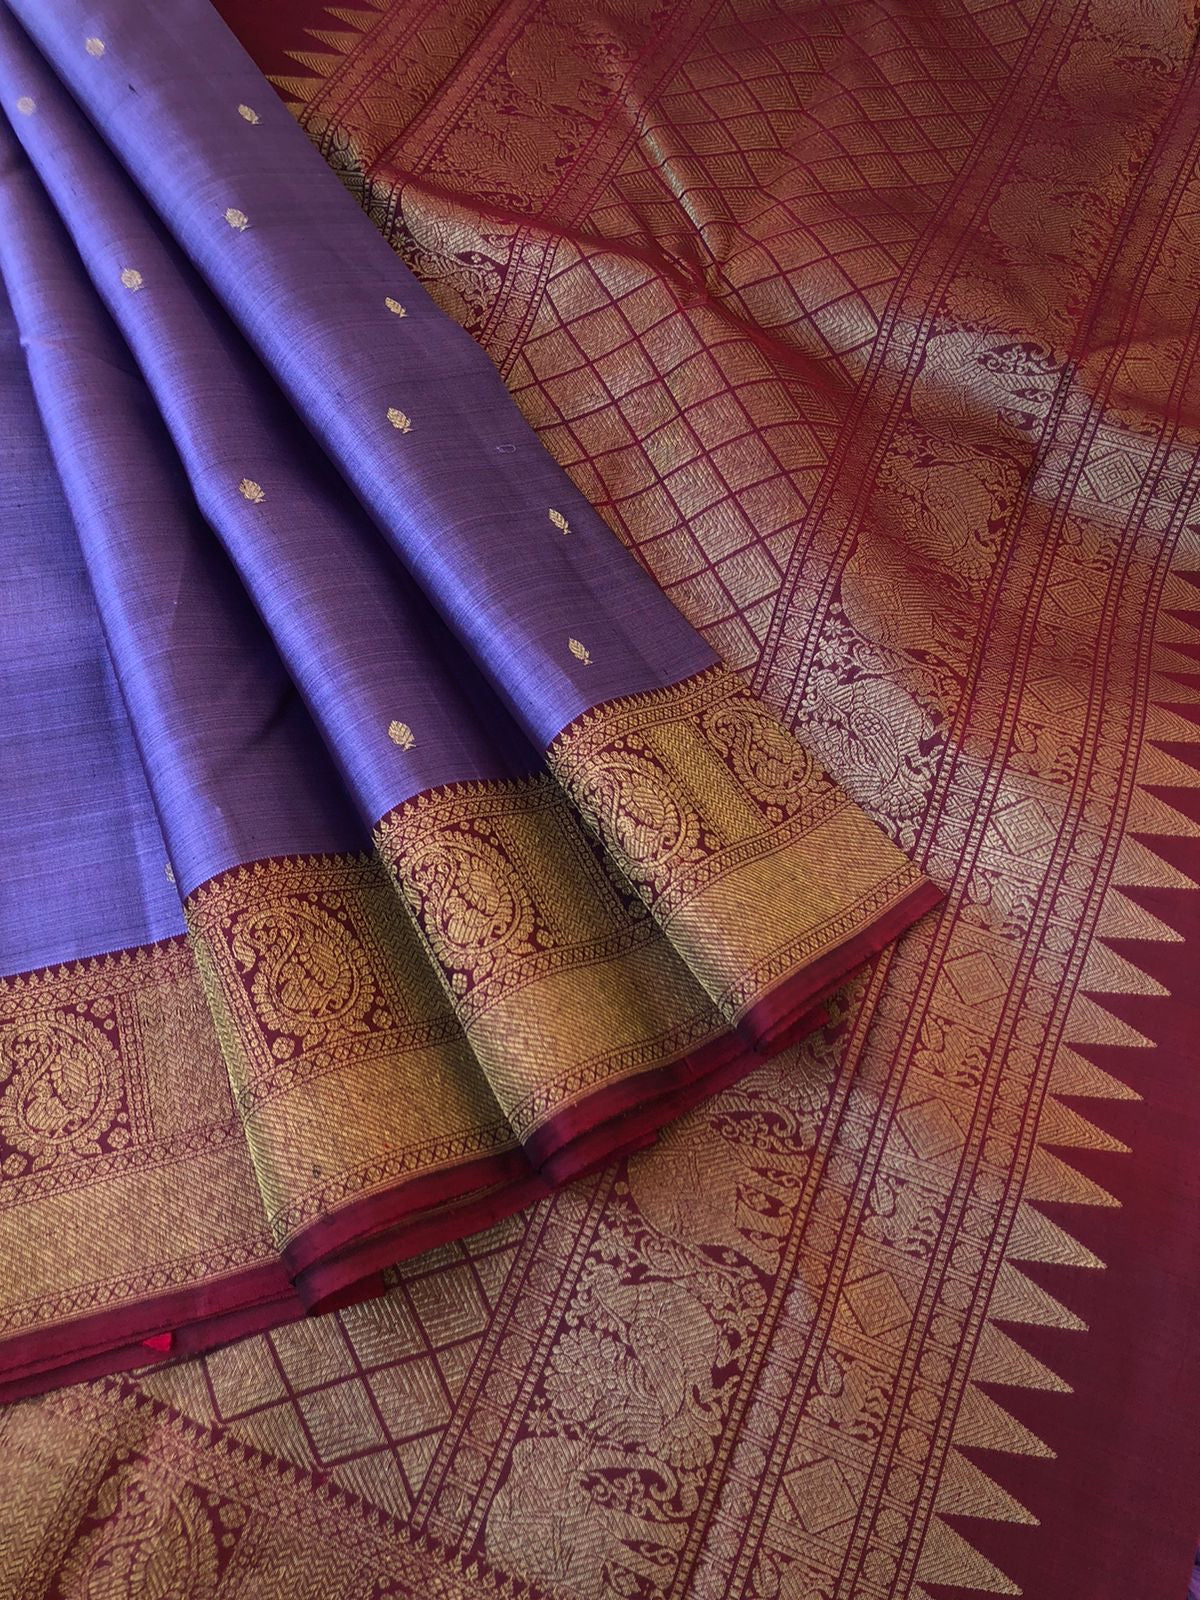 Antique Touch Kanchivarams - unusual and unique burnt metallic lavender and maroon